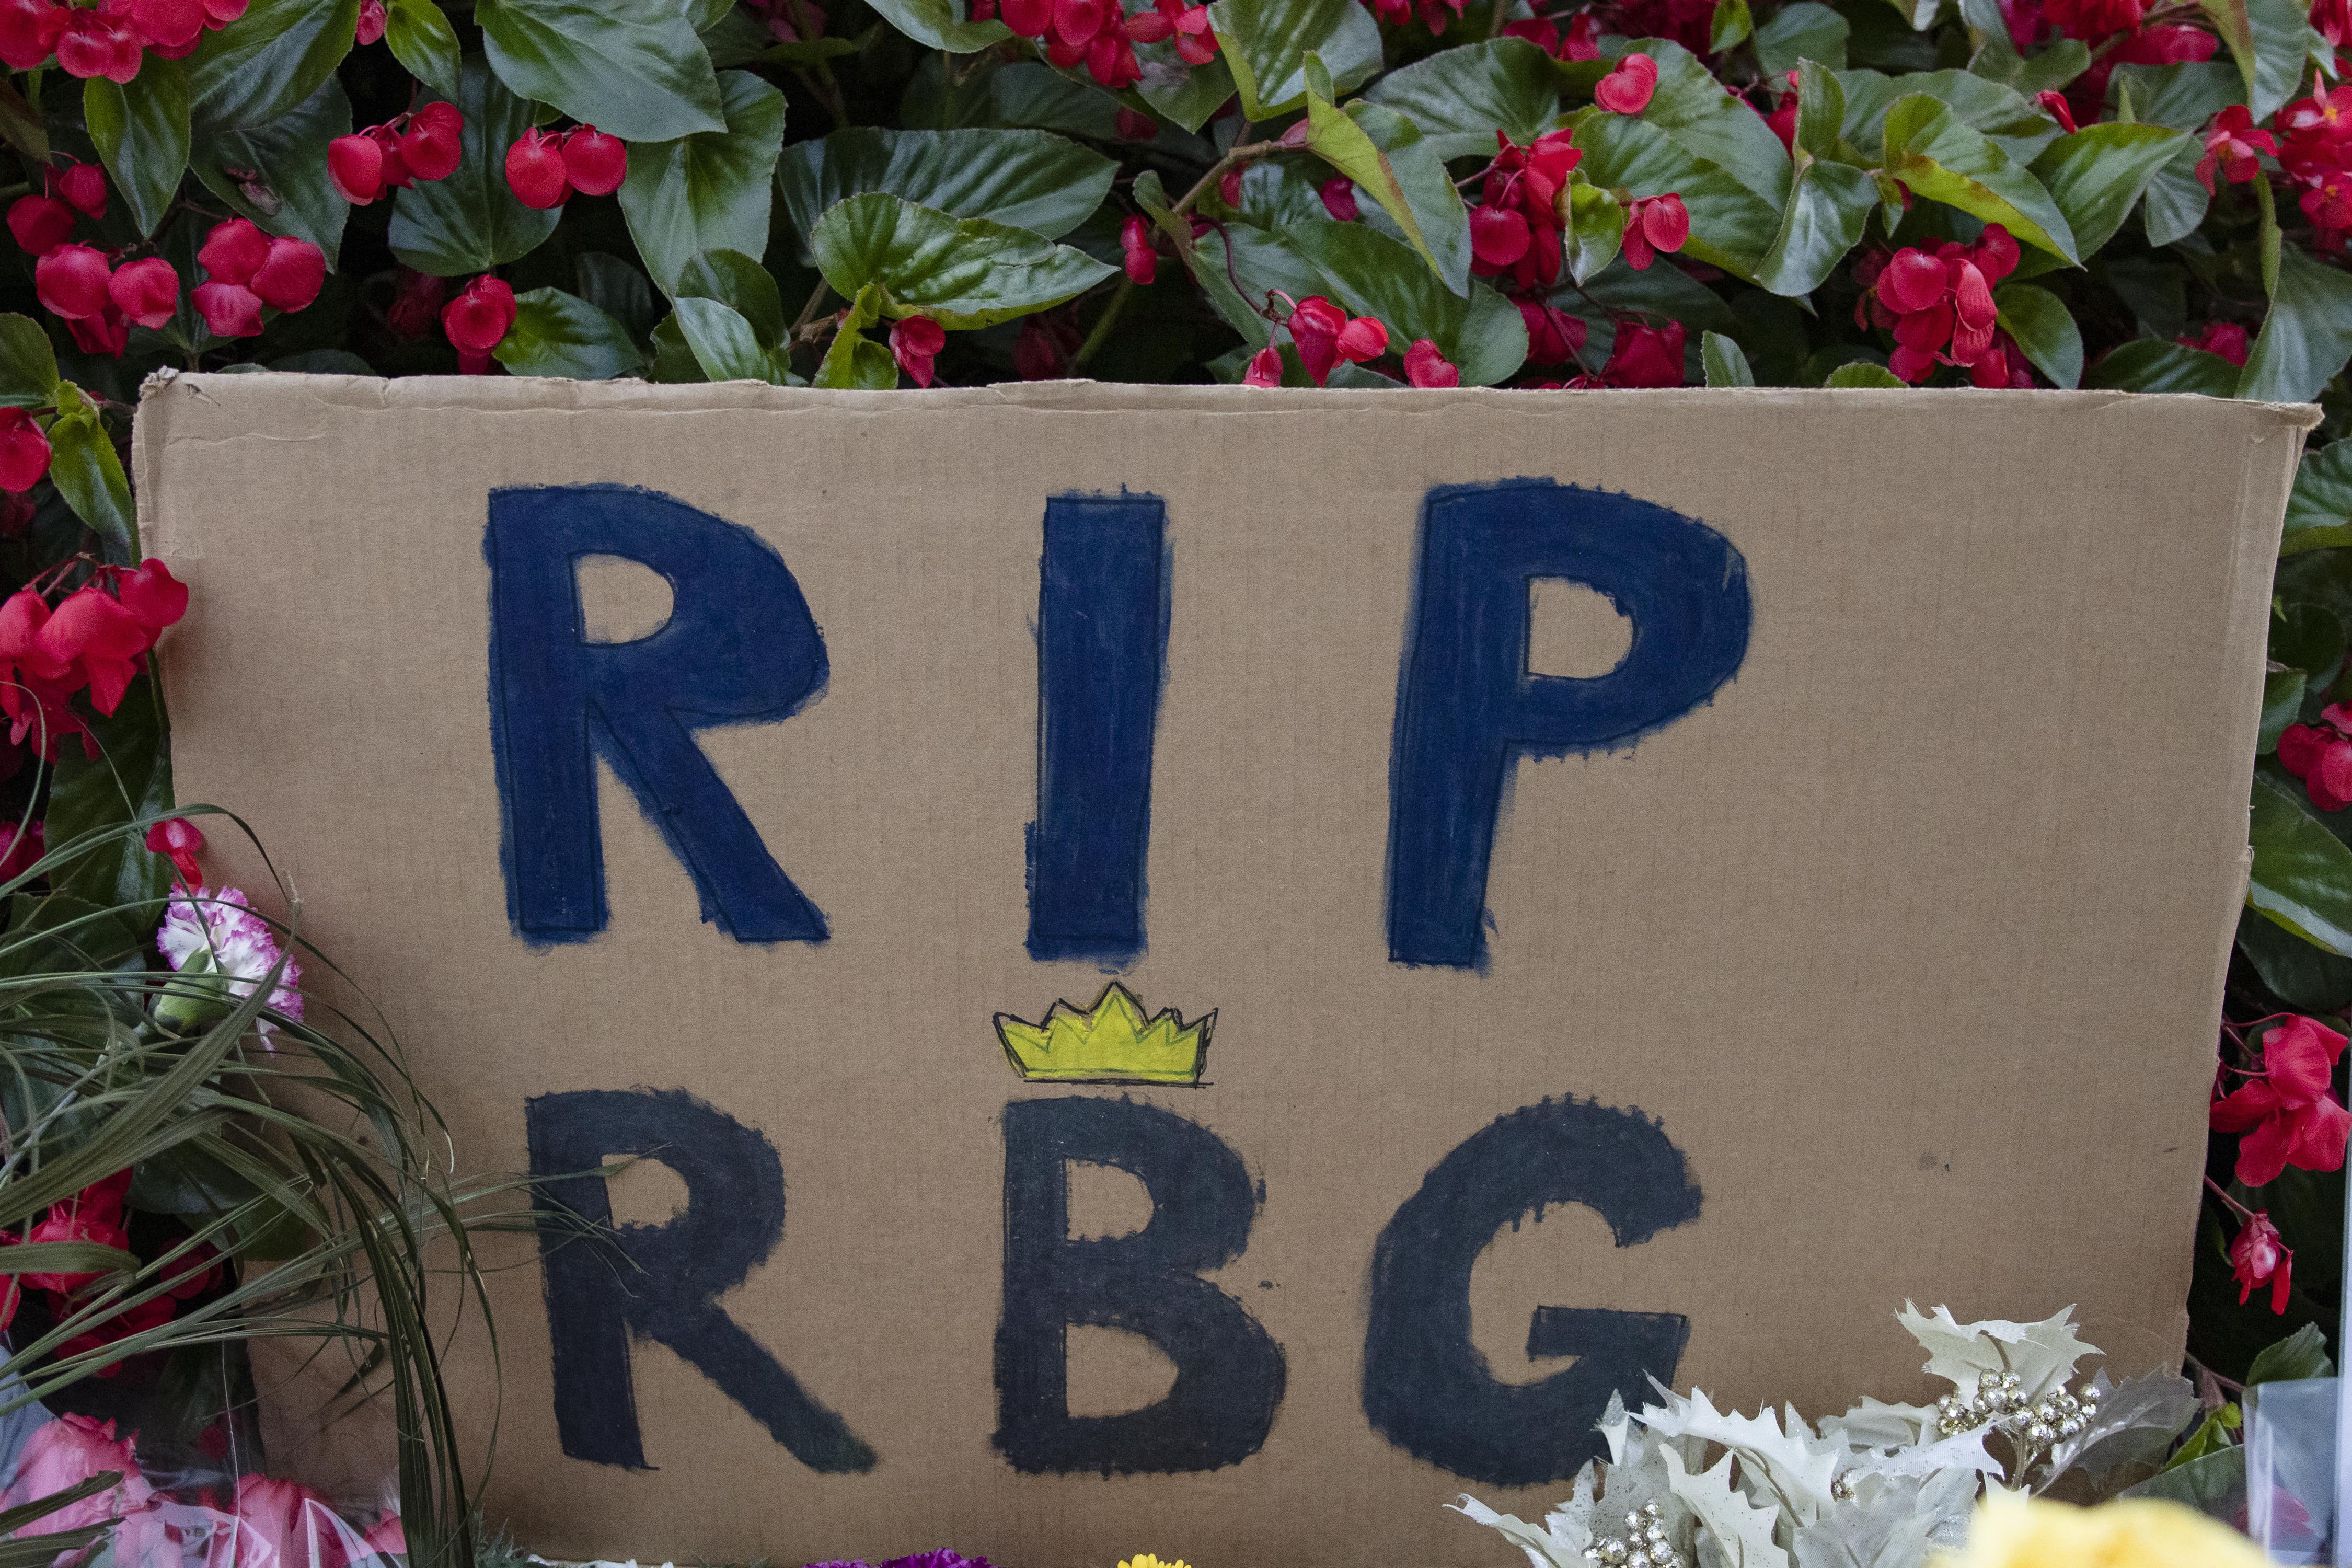 A cardboard sign that reads "RIP RBG," amid flowers